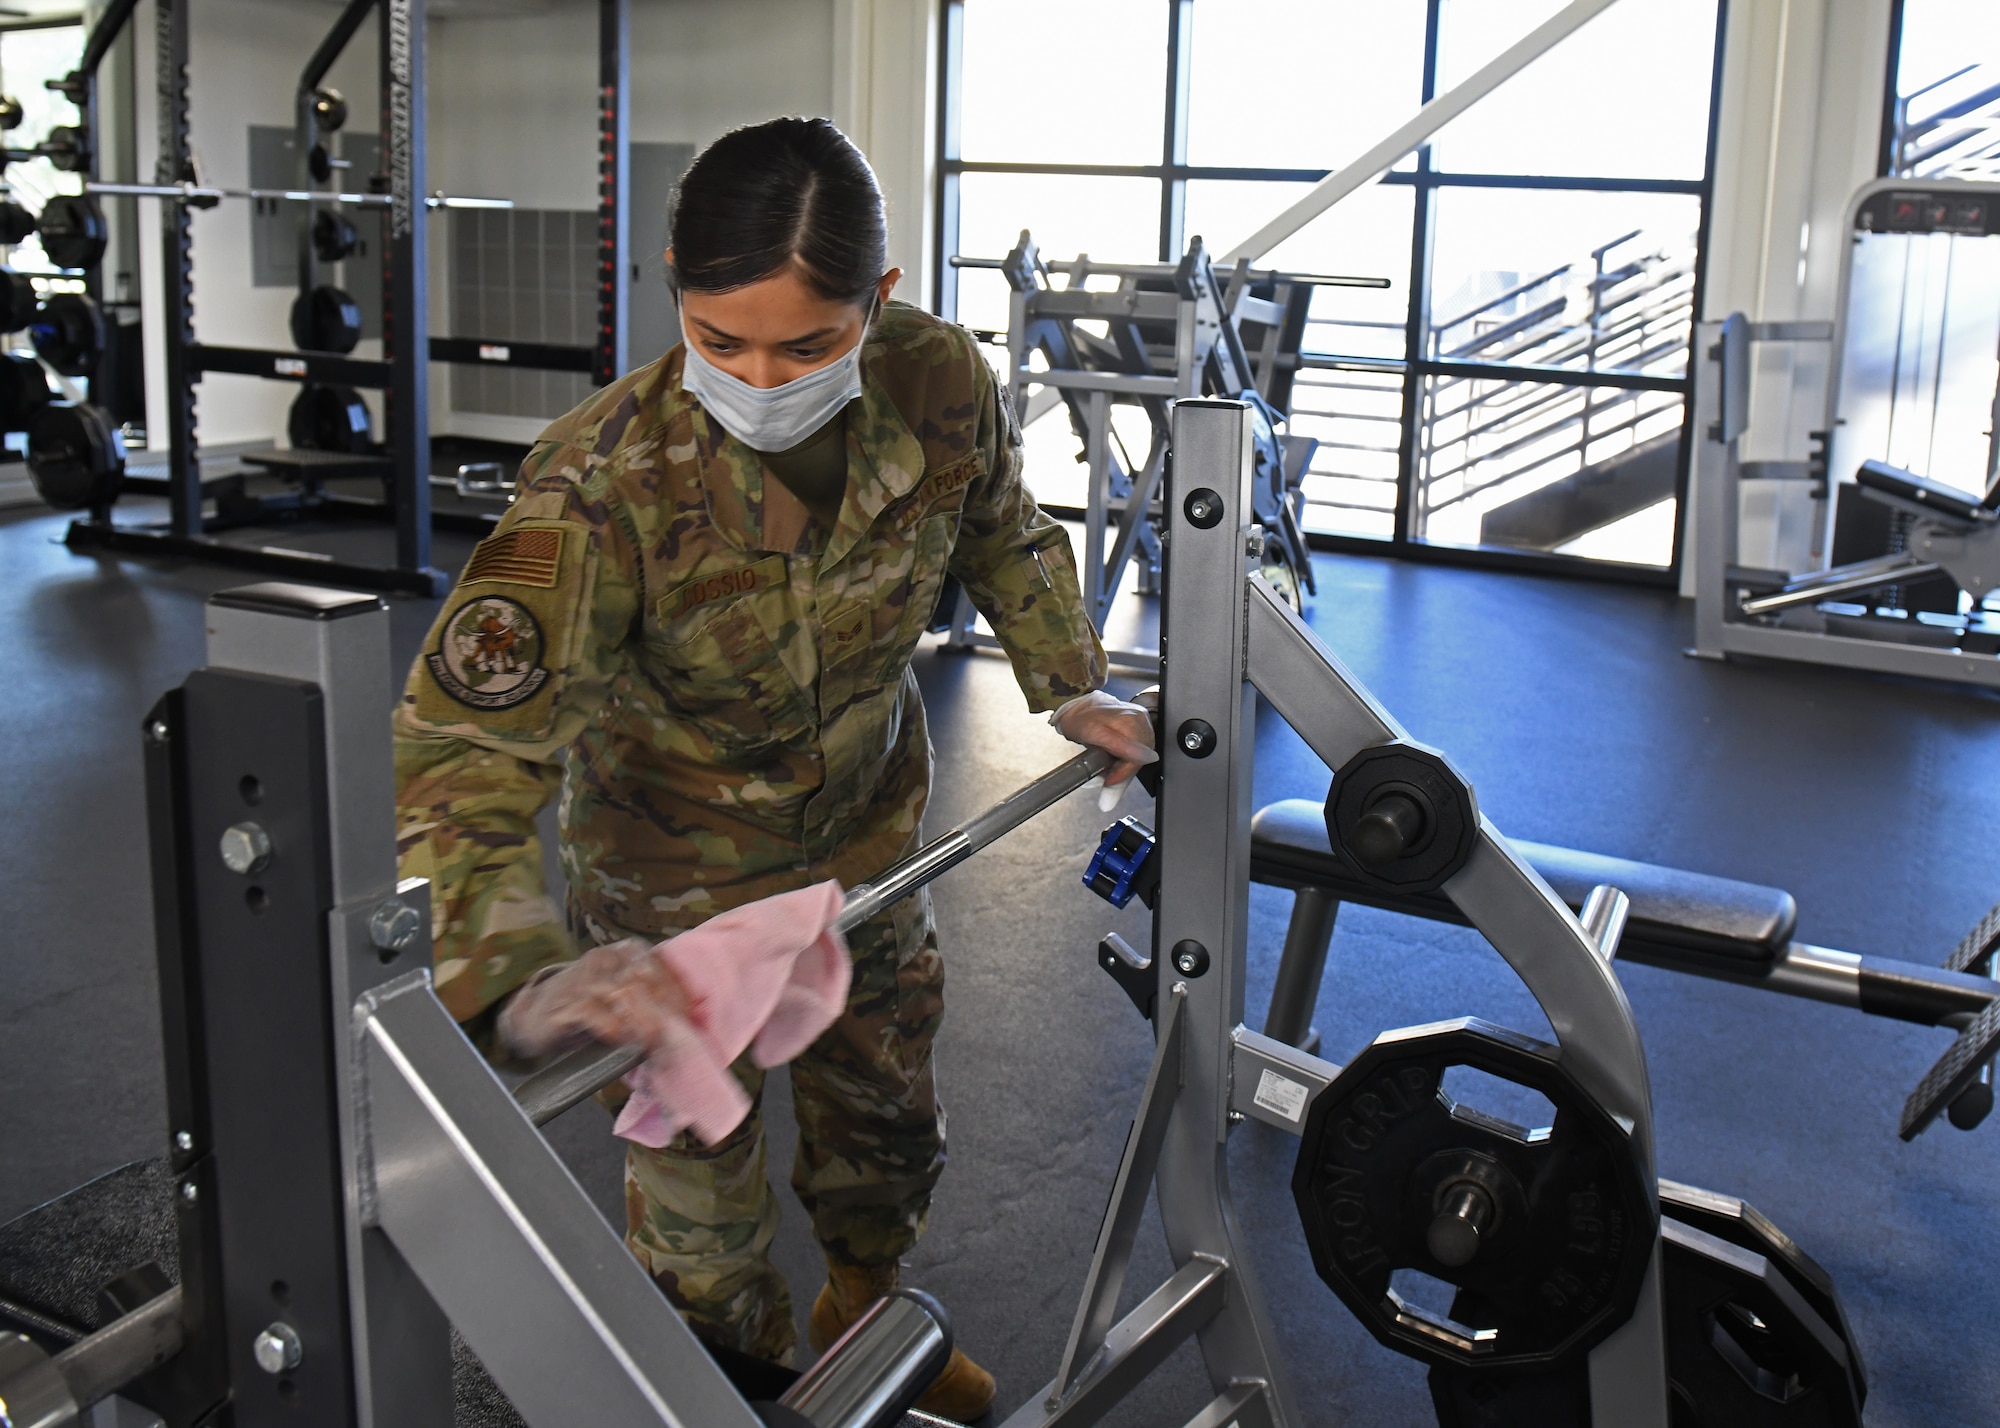 U.S. Air Force Senior Airman Nansi Cossio, 9th Force Support Squadron fitness technician, sanitizes a piece of equipment at the Harris Fitness Center, May 6, 2020, at Beale Air Force Base, California. Every piece of equipment found in the facility was disinfected to ensure the safety and health of the base community from COVID-19. (U.S. Air Force photo by Airman 1st Class Luis A. Ruiz-Vazquez)